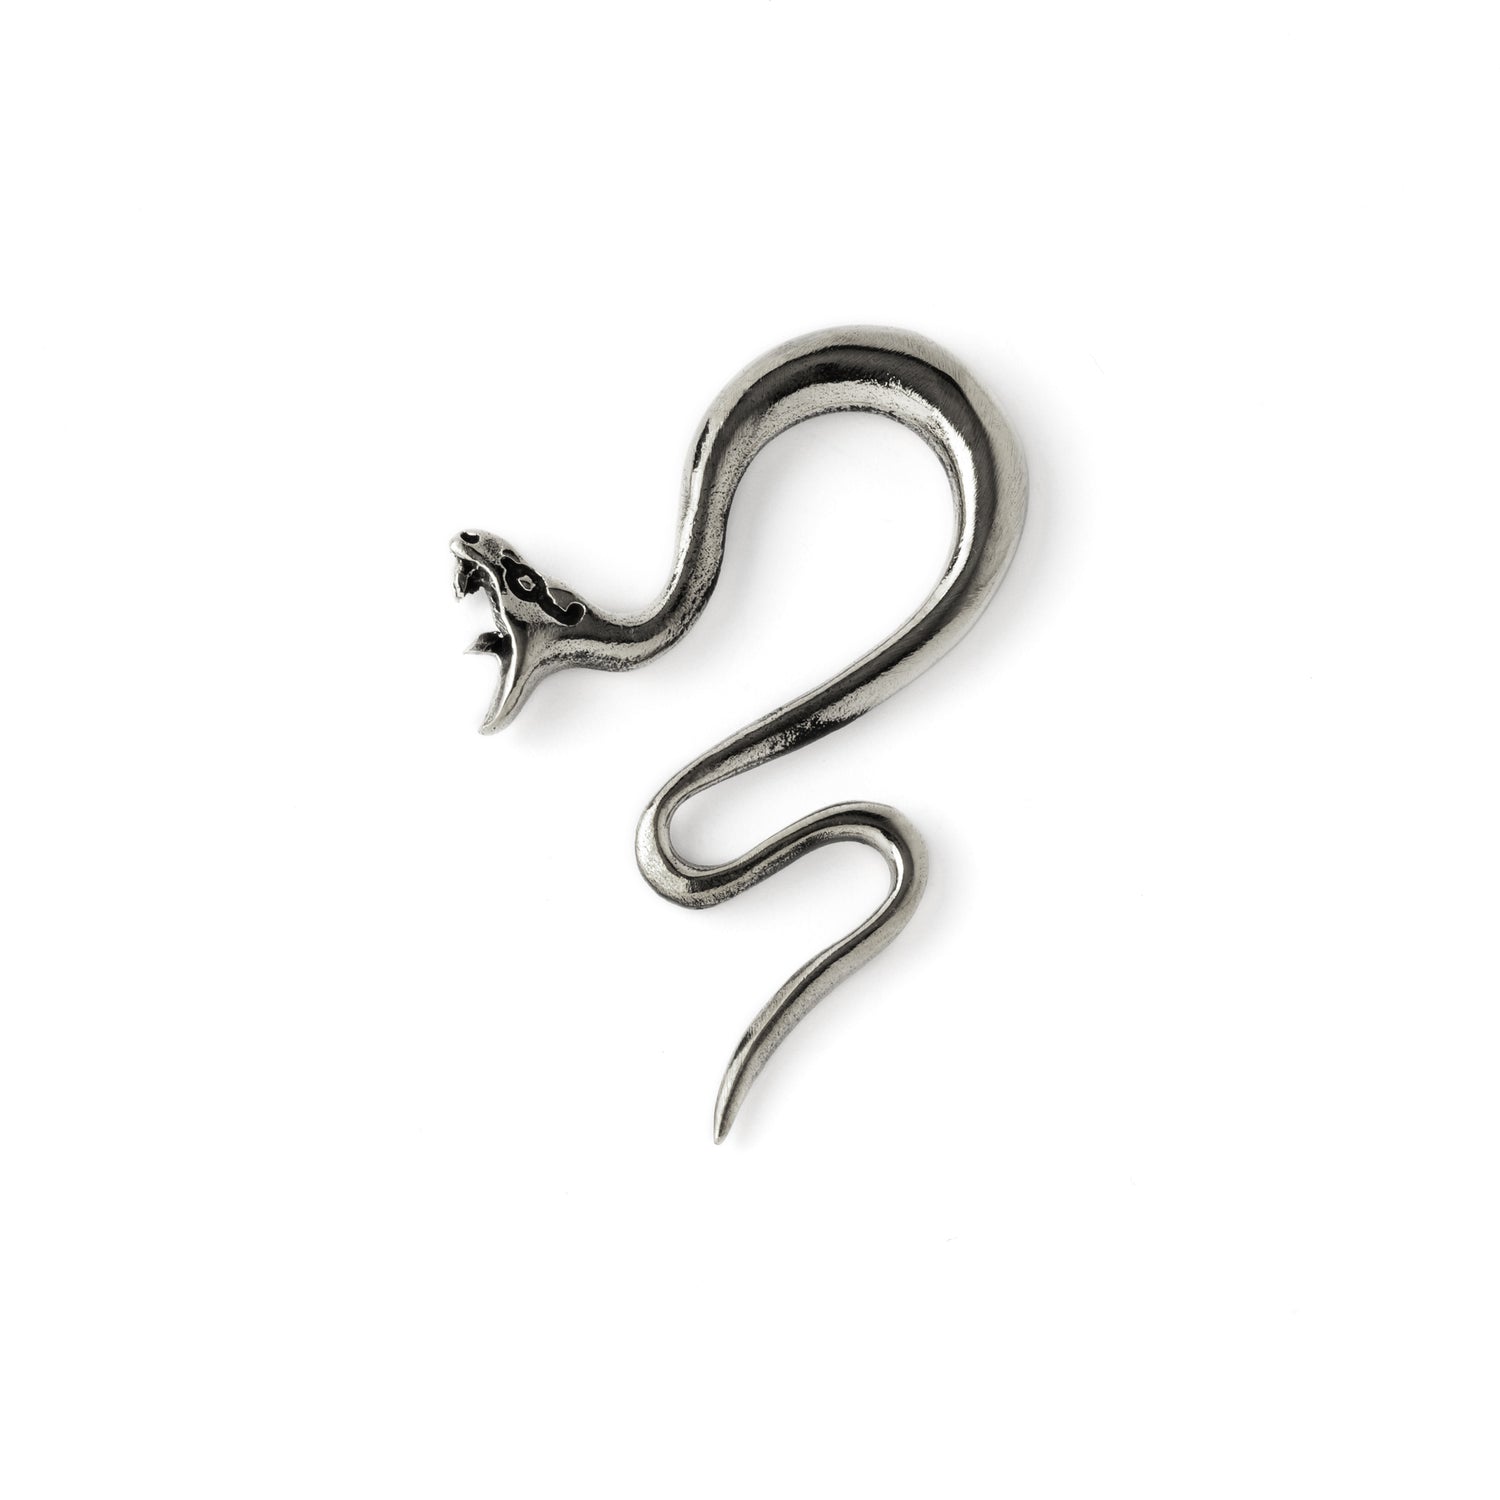 single silver brass serpent ear hangers stretchers for stretched ears frontal view